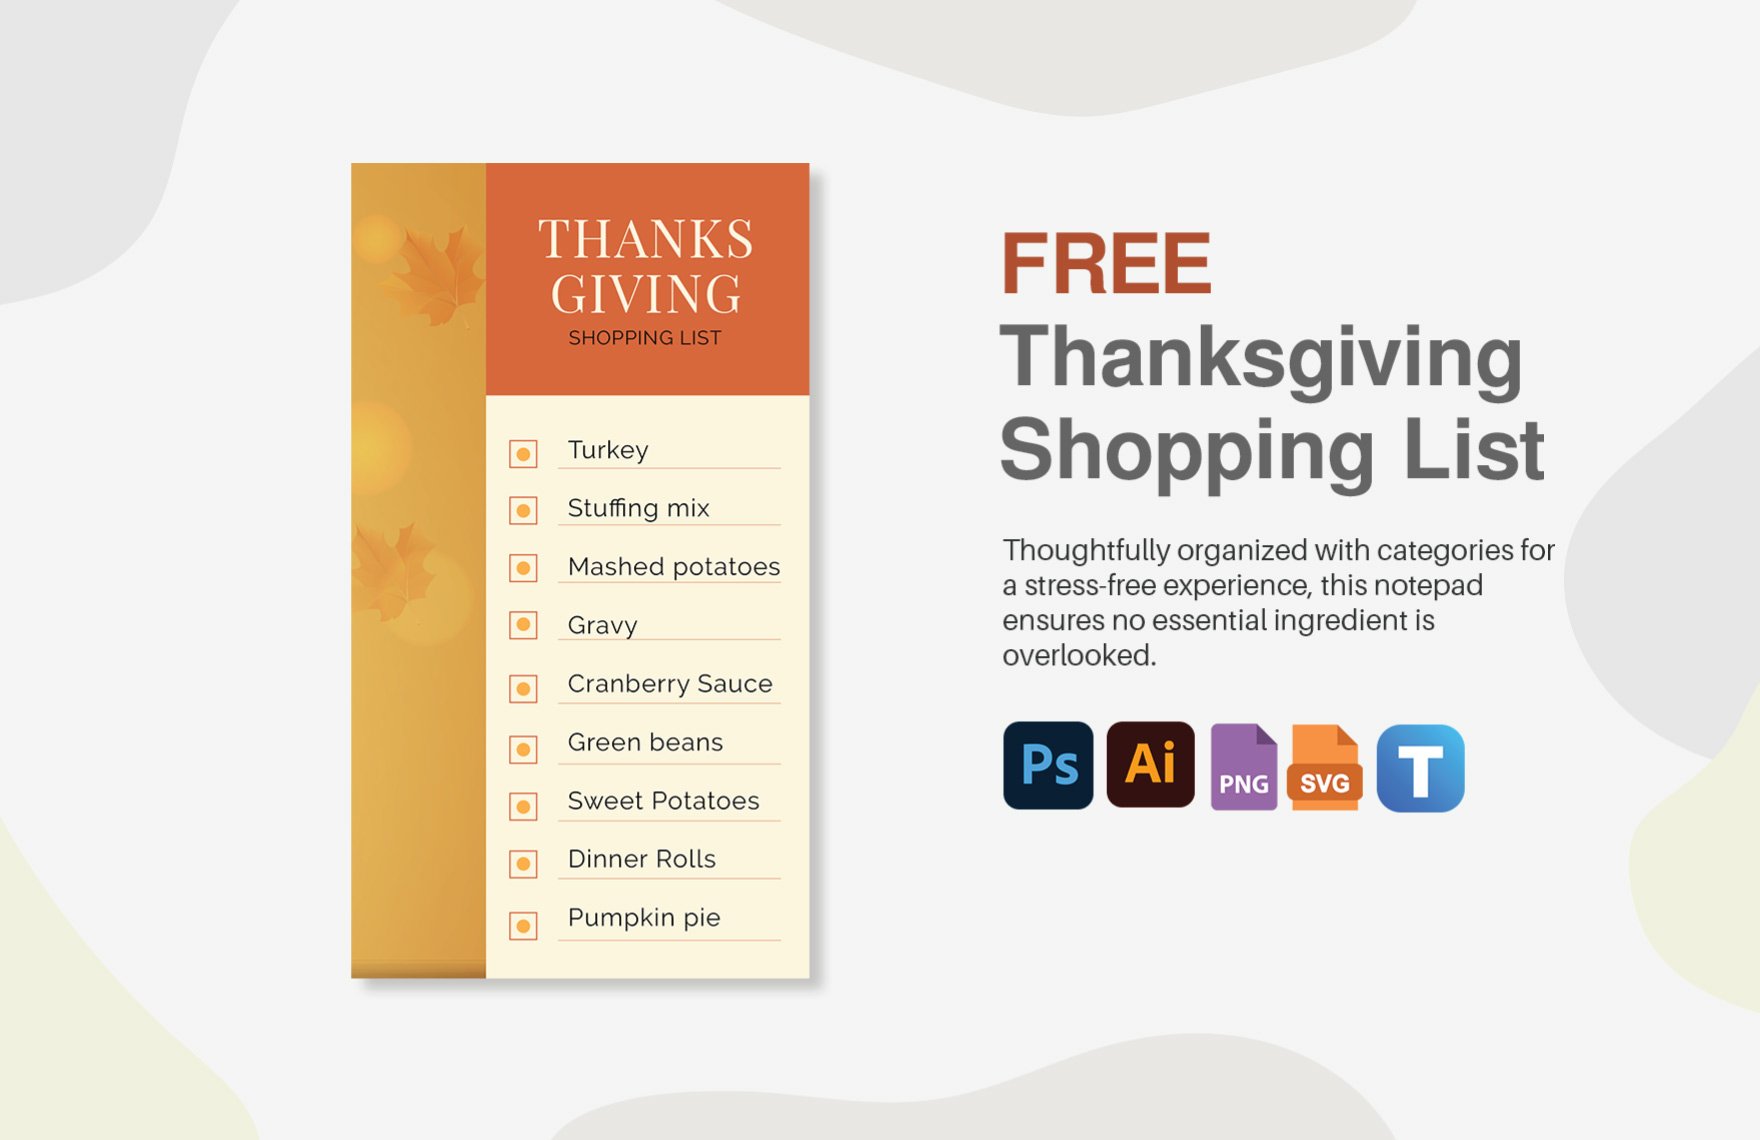 Free Thanksgiving Shopping List in PDF, Illustrator, PSD, SVG, PNG